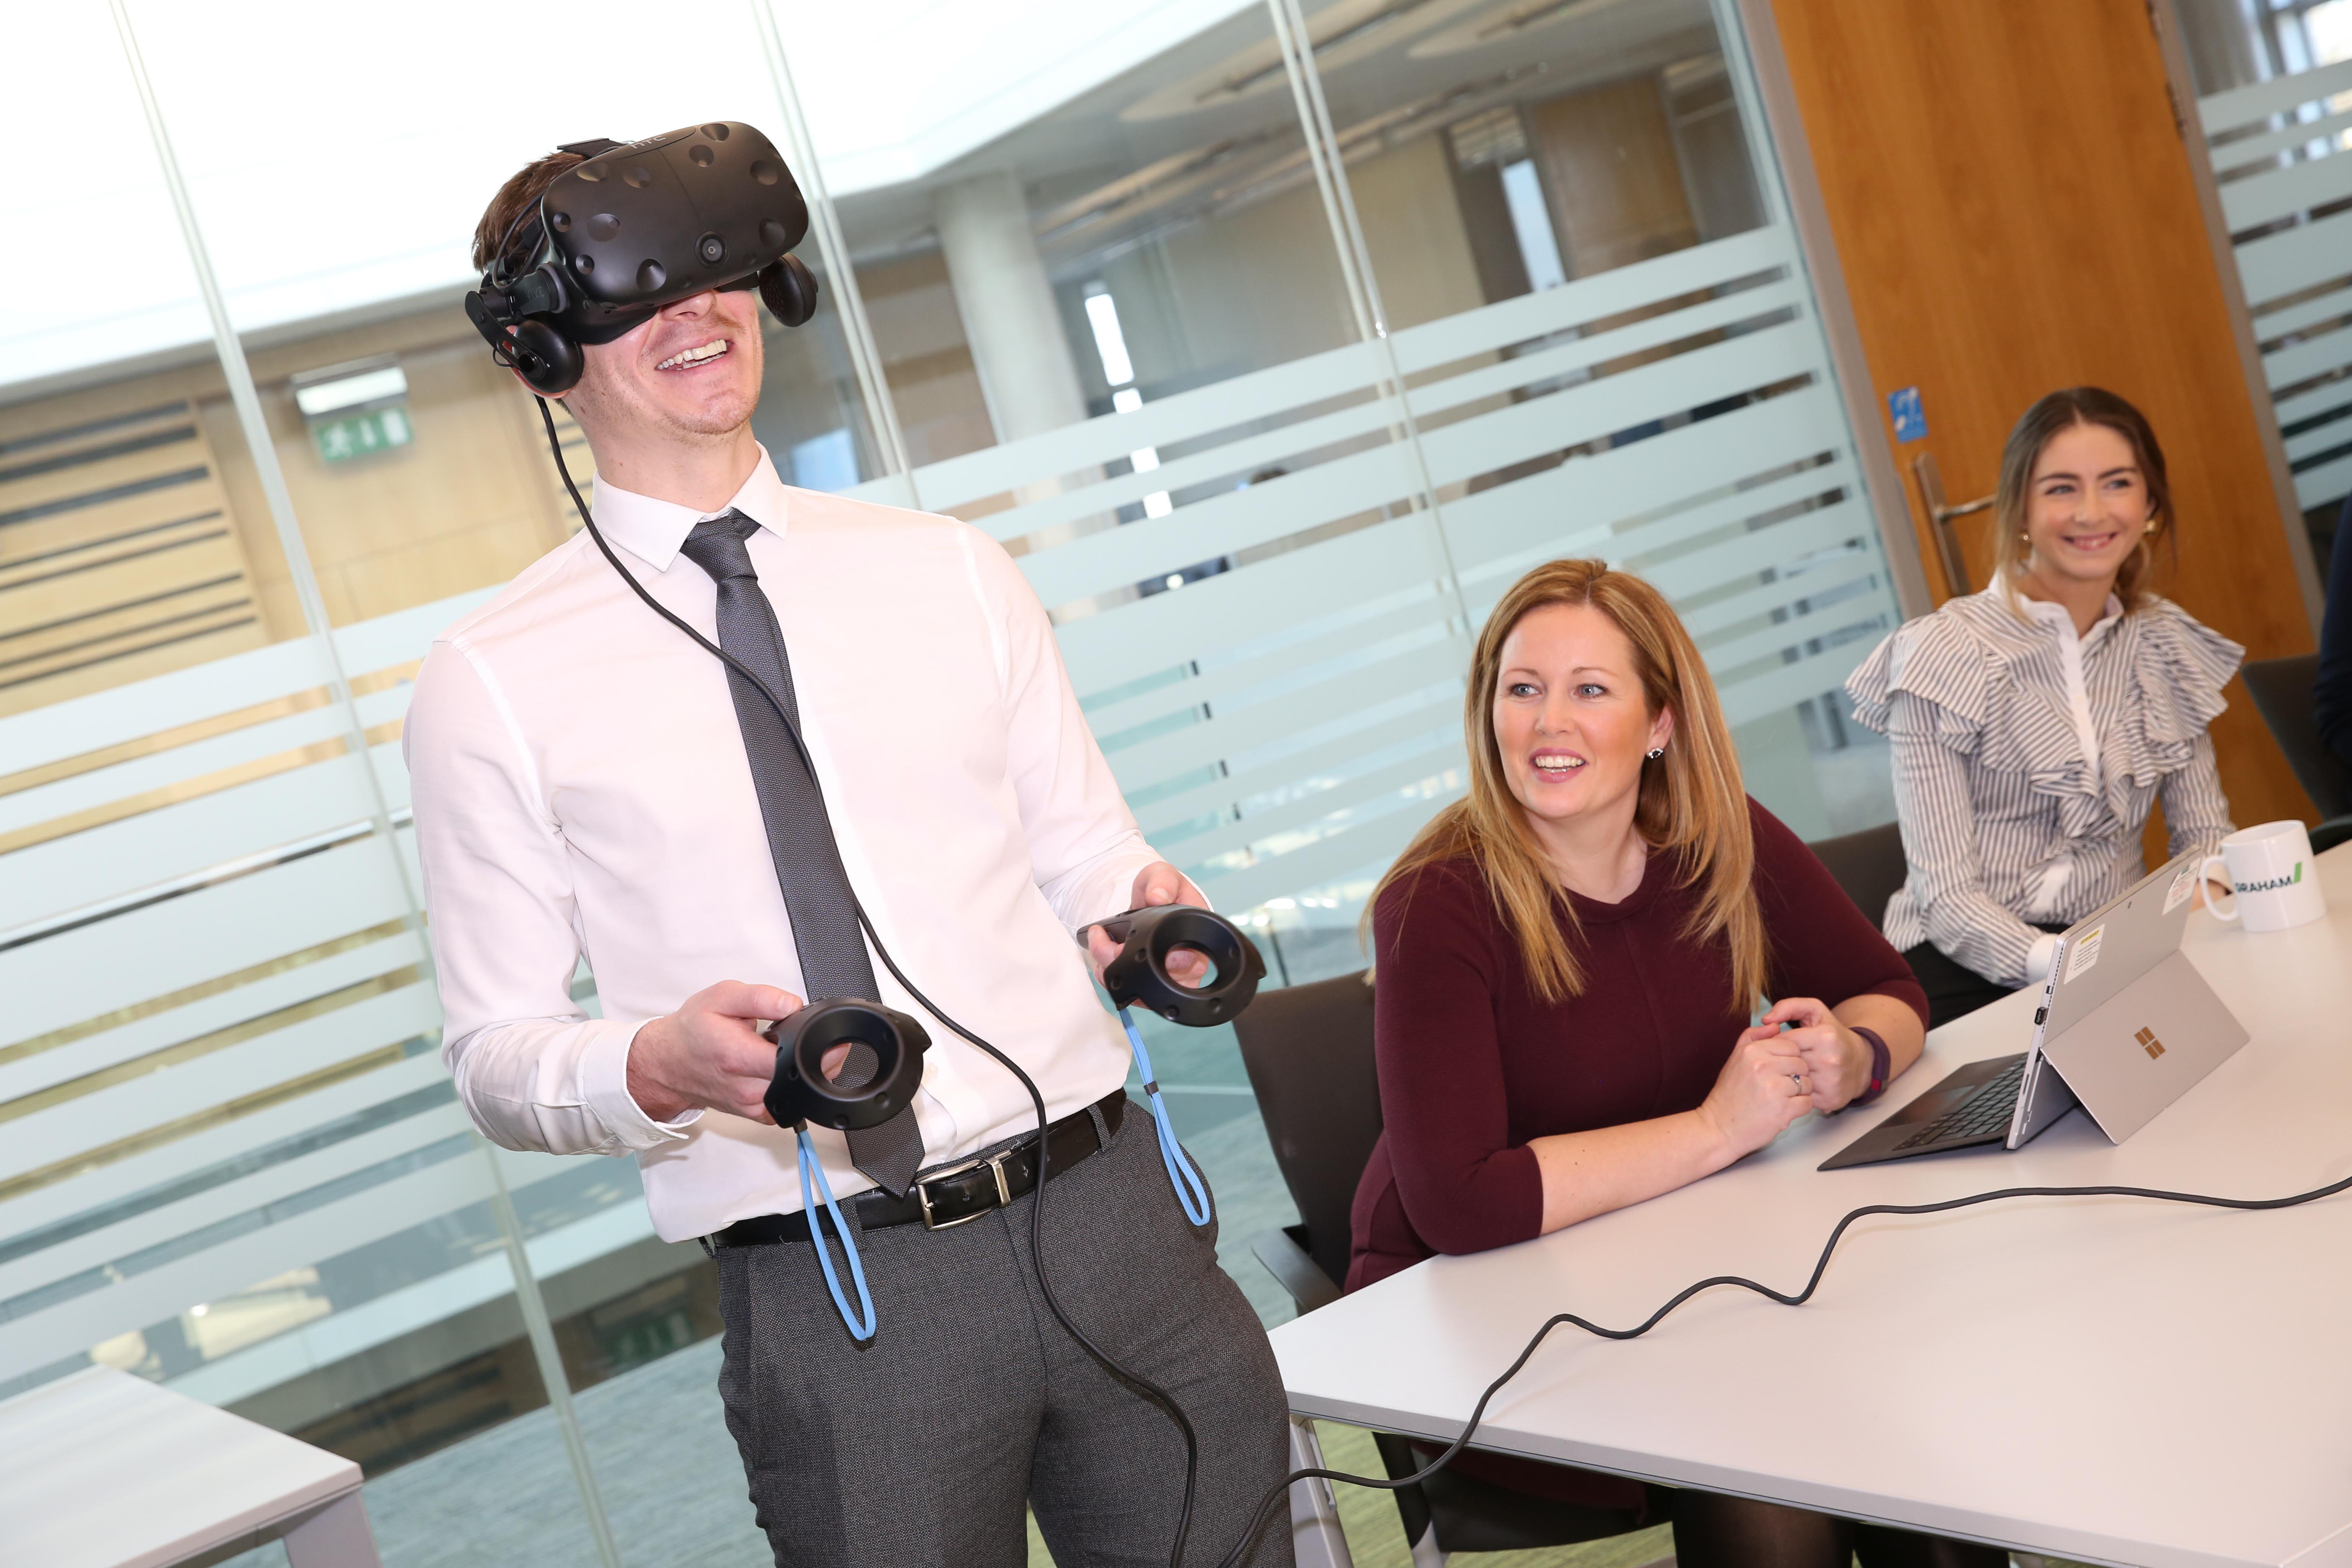 Cancer care clinicians treated to VR ‘walk around’ image